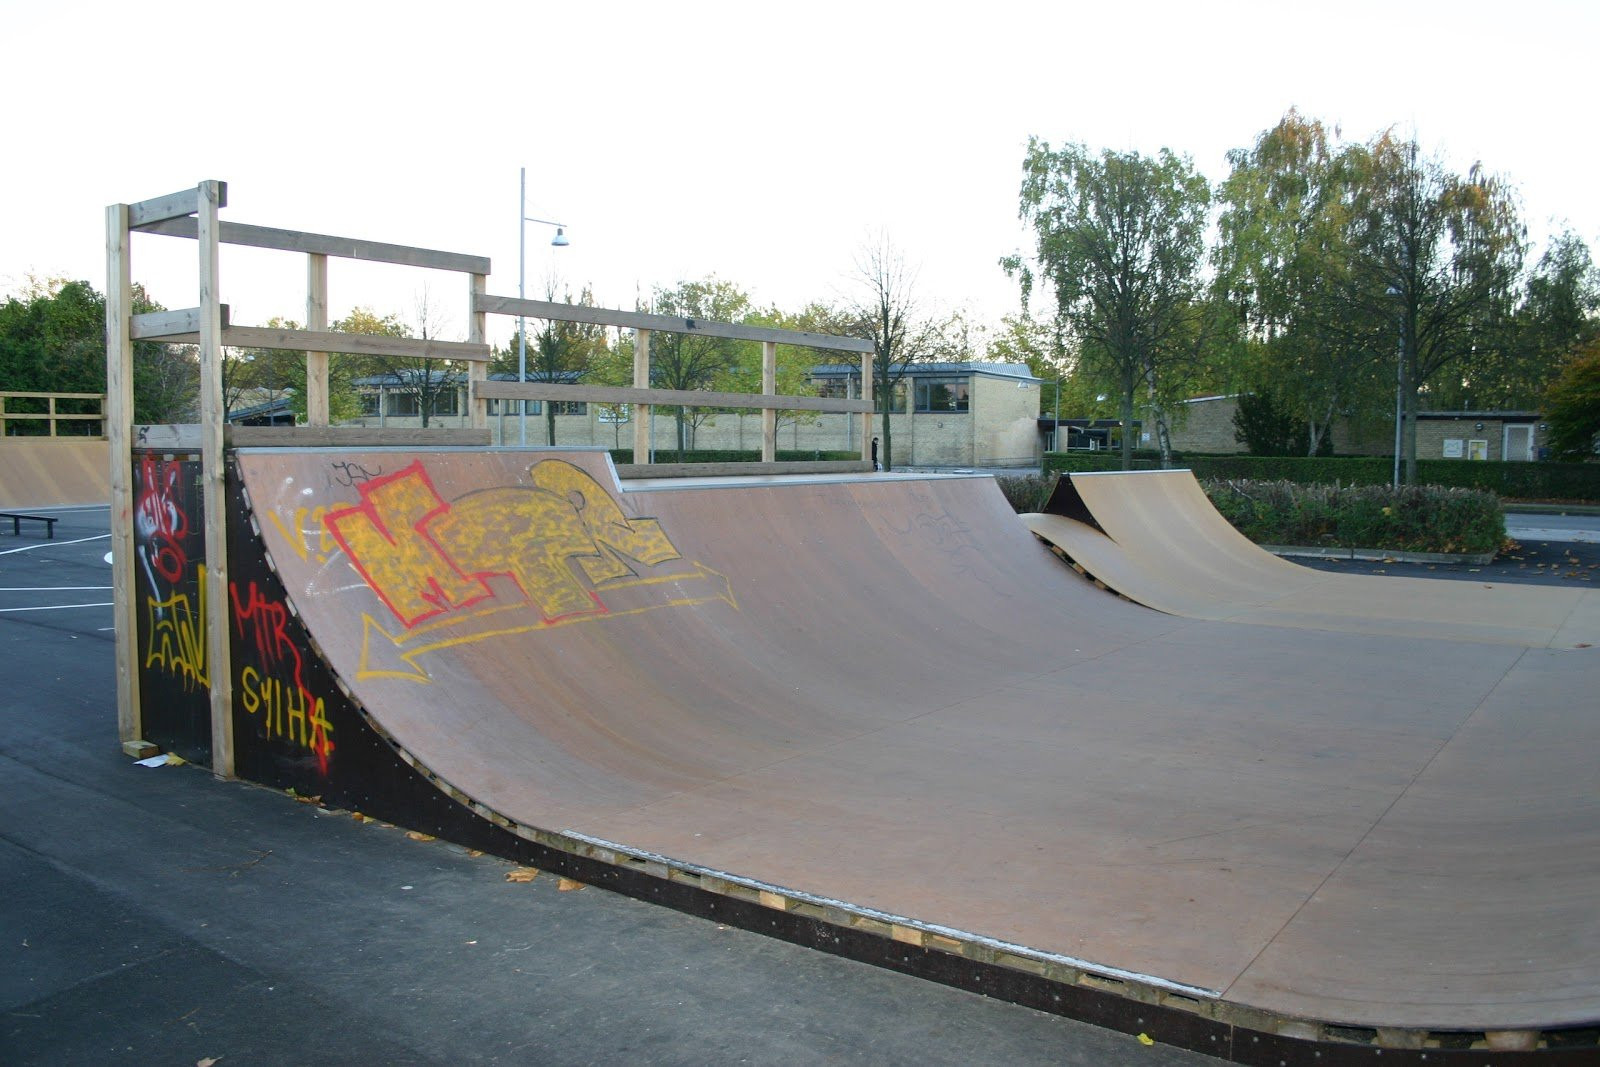 Unfortunately, there is no information or any pictures from this skatepark yet. We would like to gather as much information as possible about Denmark’s skateparks on our site, so we would love your inputs.Do you have any pictures of the park, general information or would you like to describe it for us, please&nbsp;don’t hesitate to make an edit or any changes.Thanks a lot for your help!